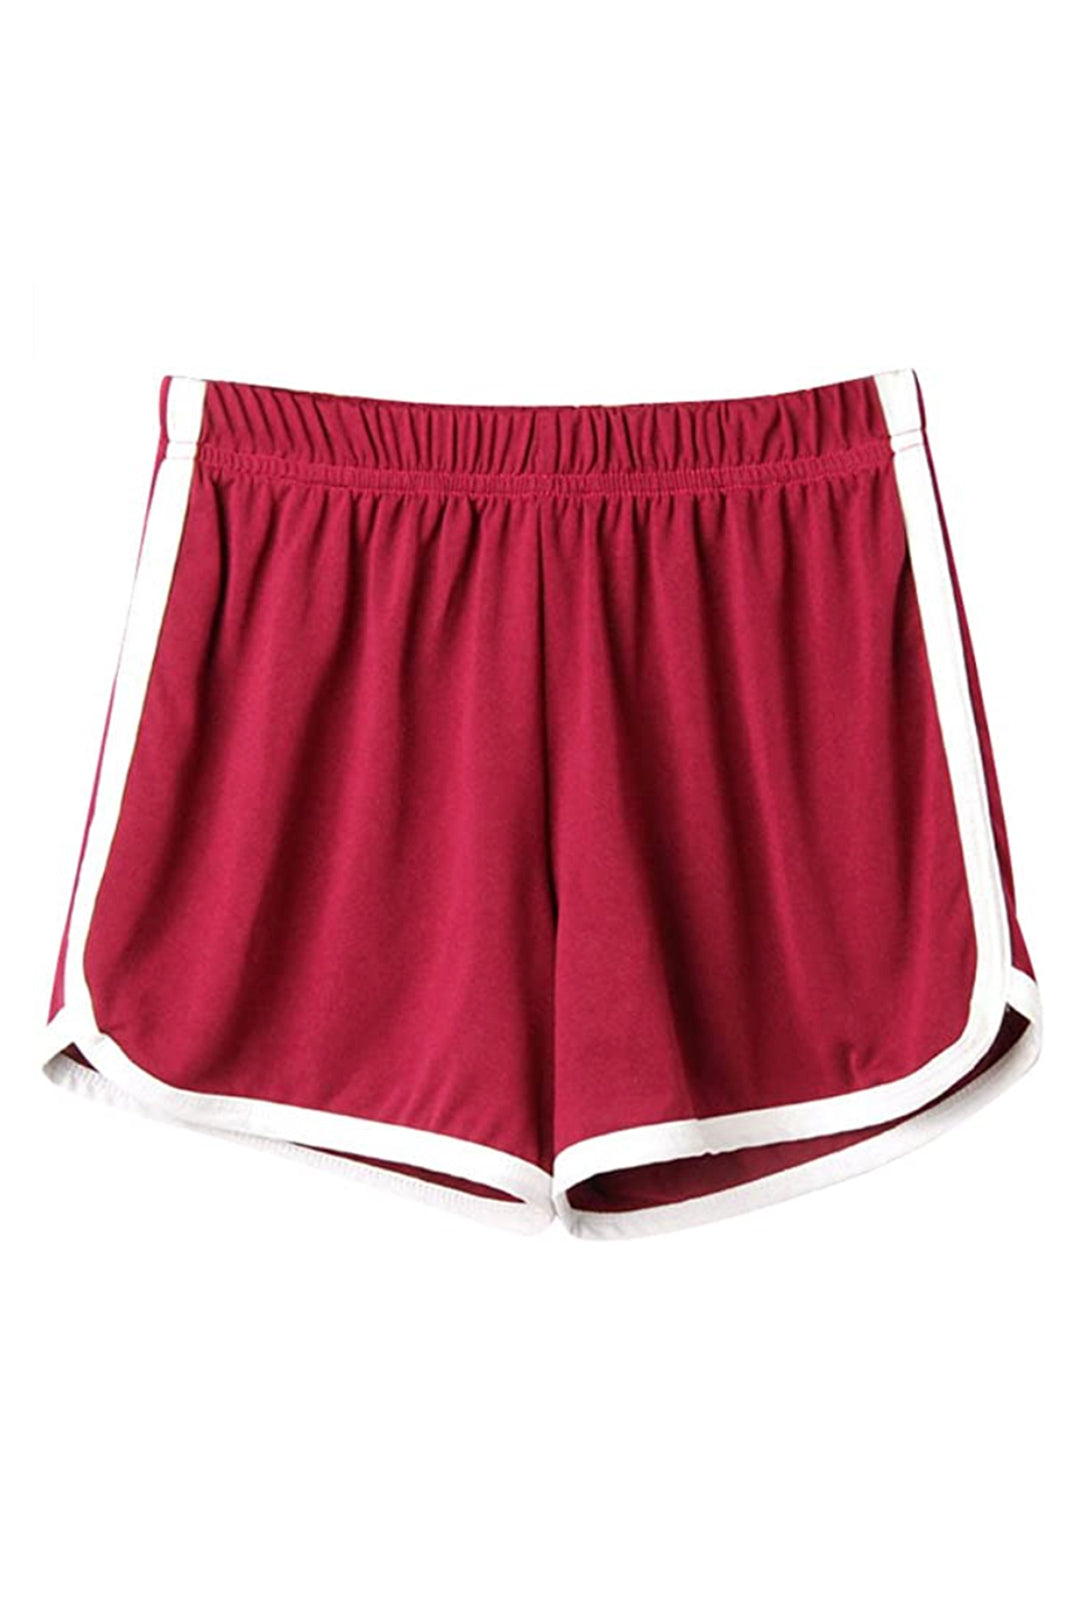 Red Athletic Striped Shorts Perth